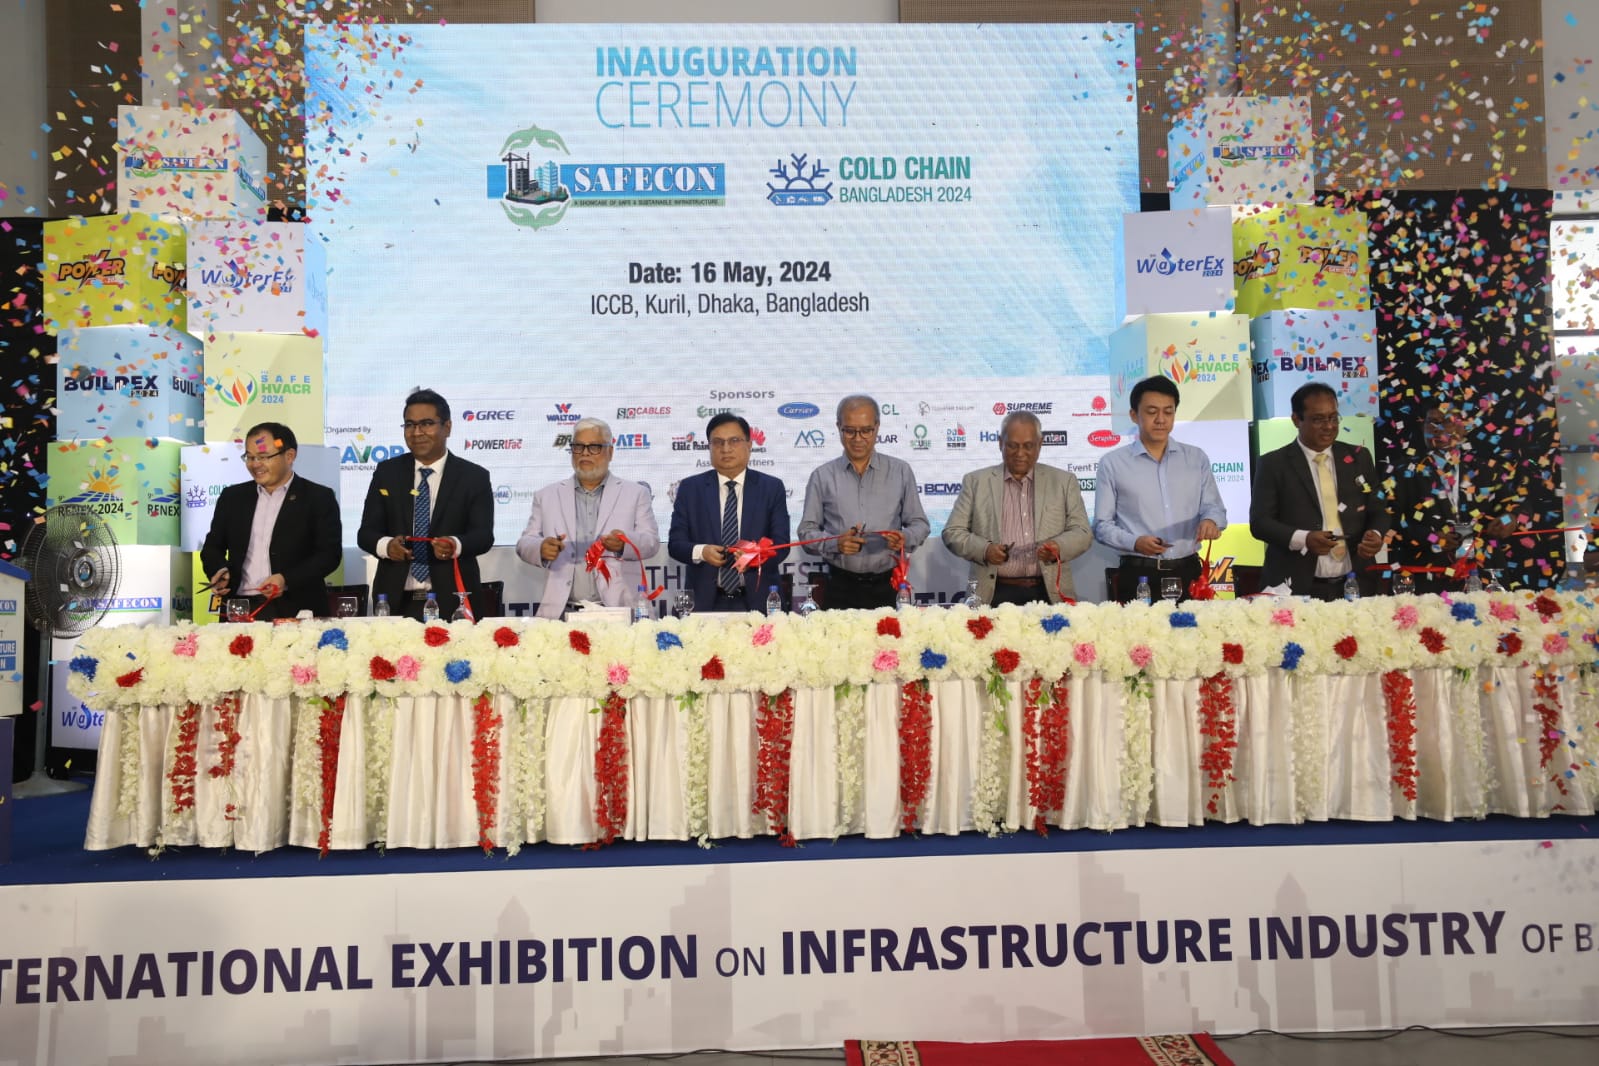 3-Day ‘Cold Chain Exhibition’ aims to modernise sector, reduce post-harvest losses